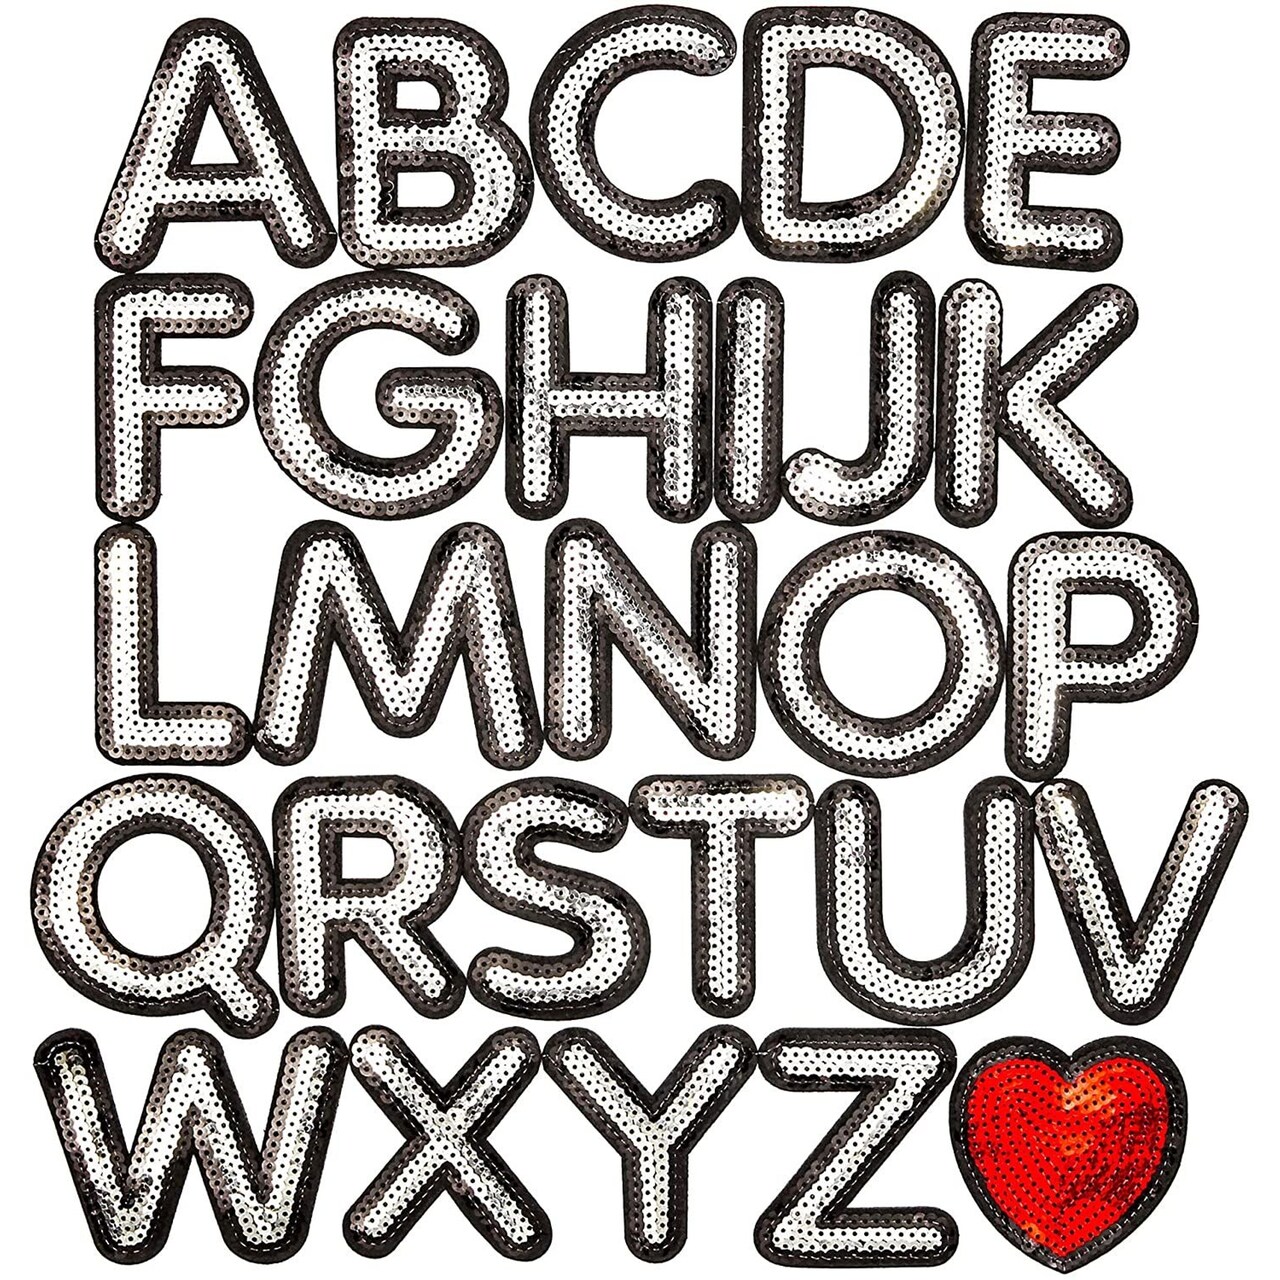 Iron On Letters for Clothing, A-Z Sequin Embroidery Patches for Jackets &  Denim (3.7 x 3 In, 27 Pieces)